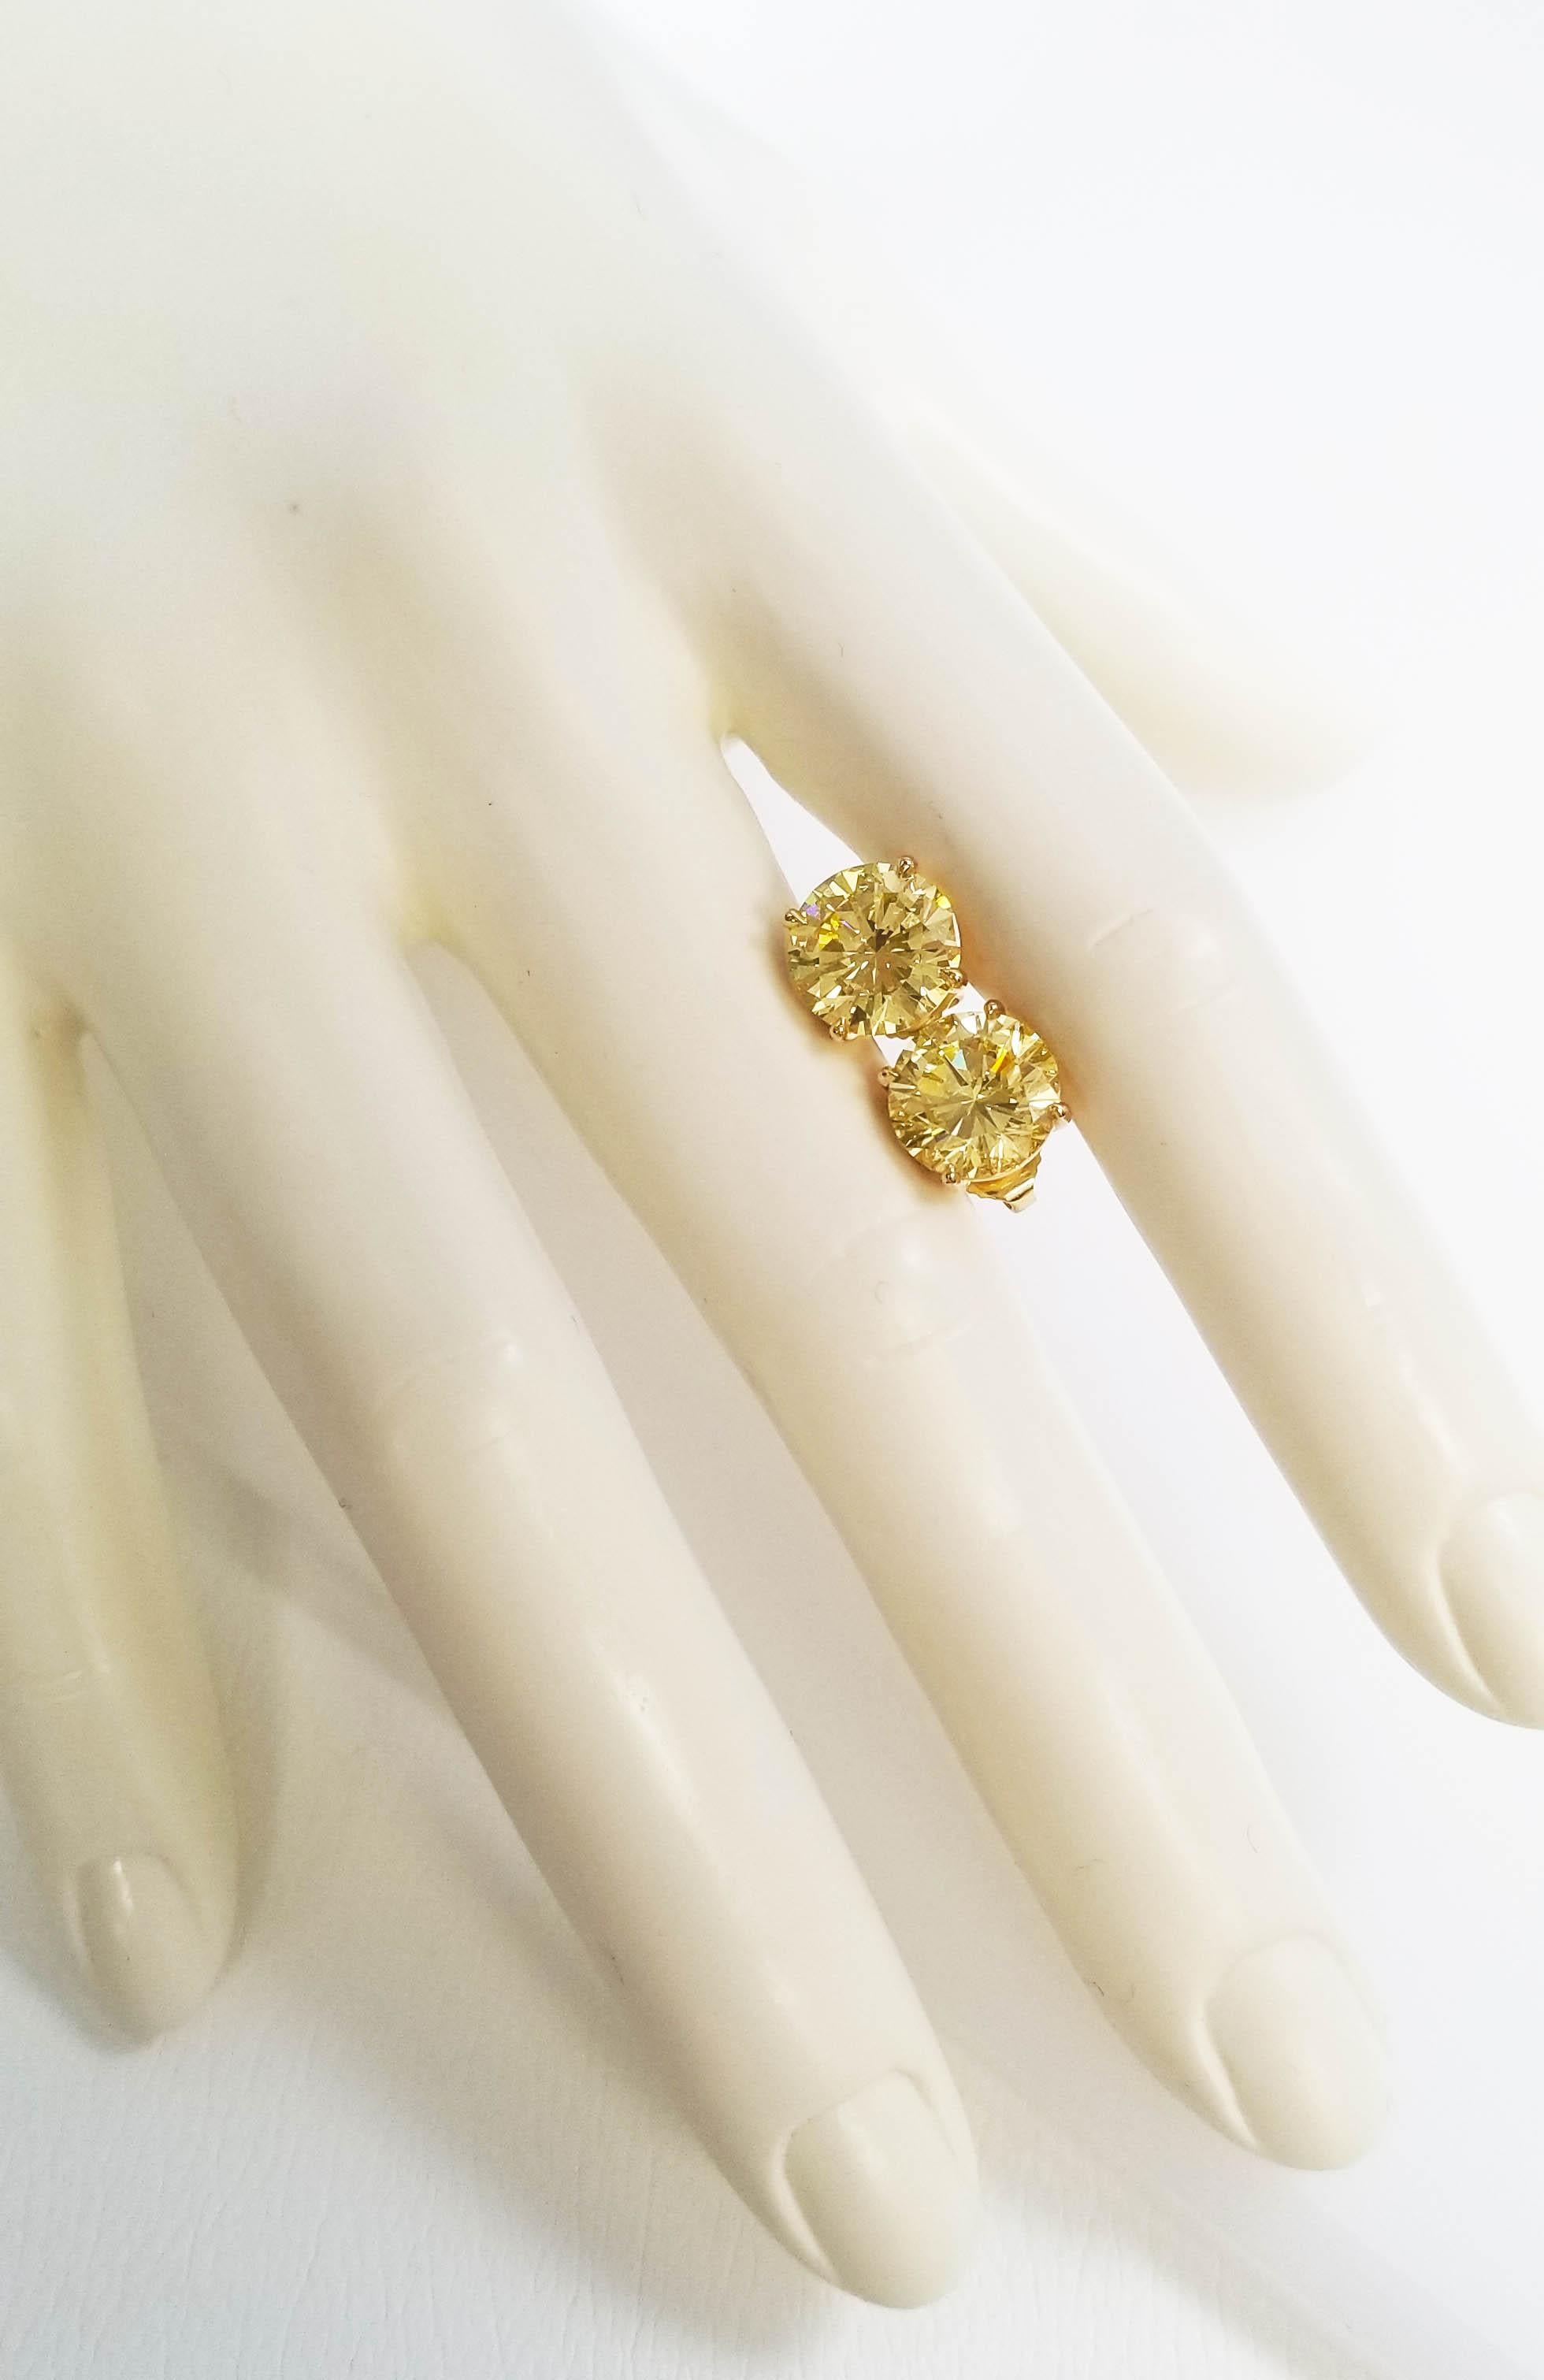 Contemporary SCARSELLI Stud Gold Earrings 3 Carat Fancy Intense Yellow Diamond Each  For Sale